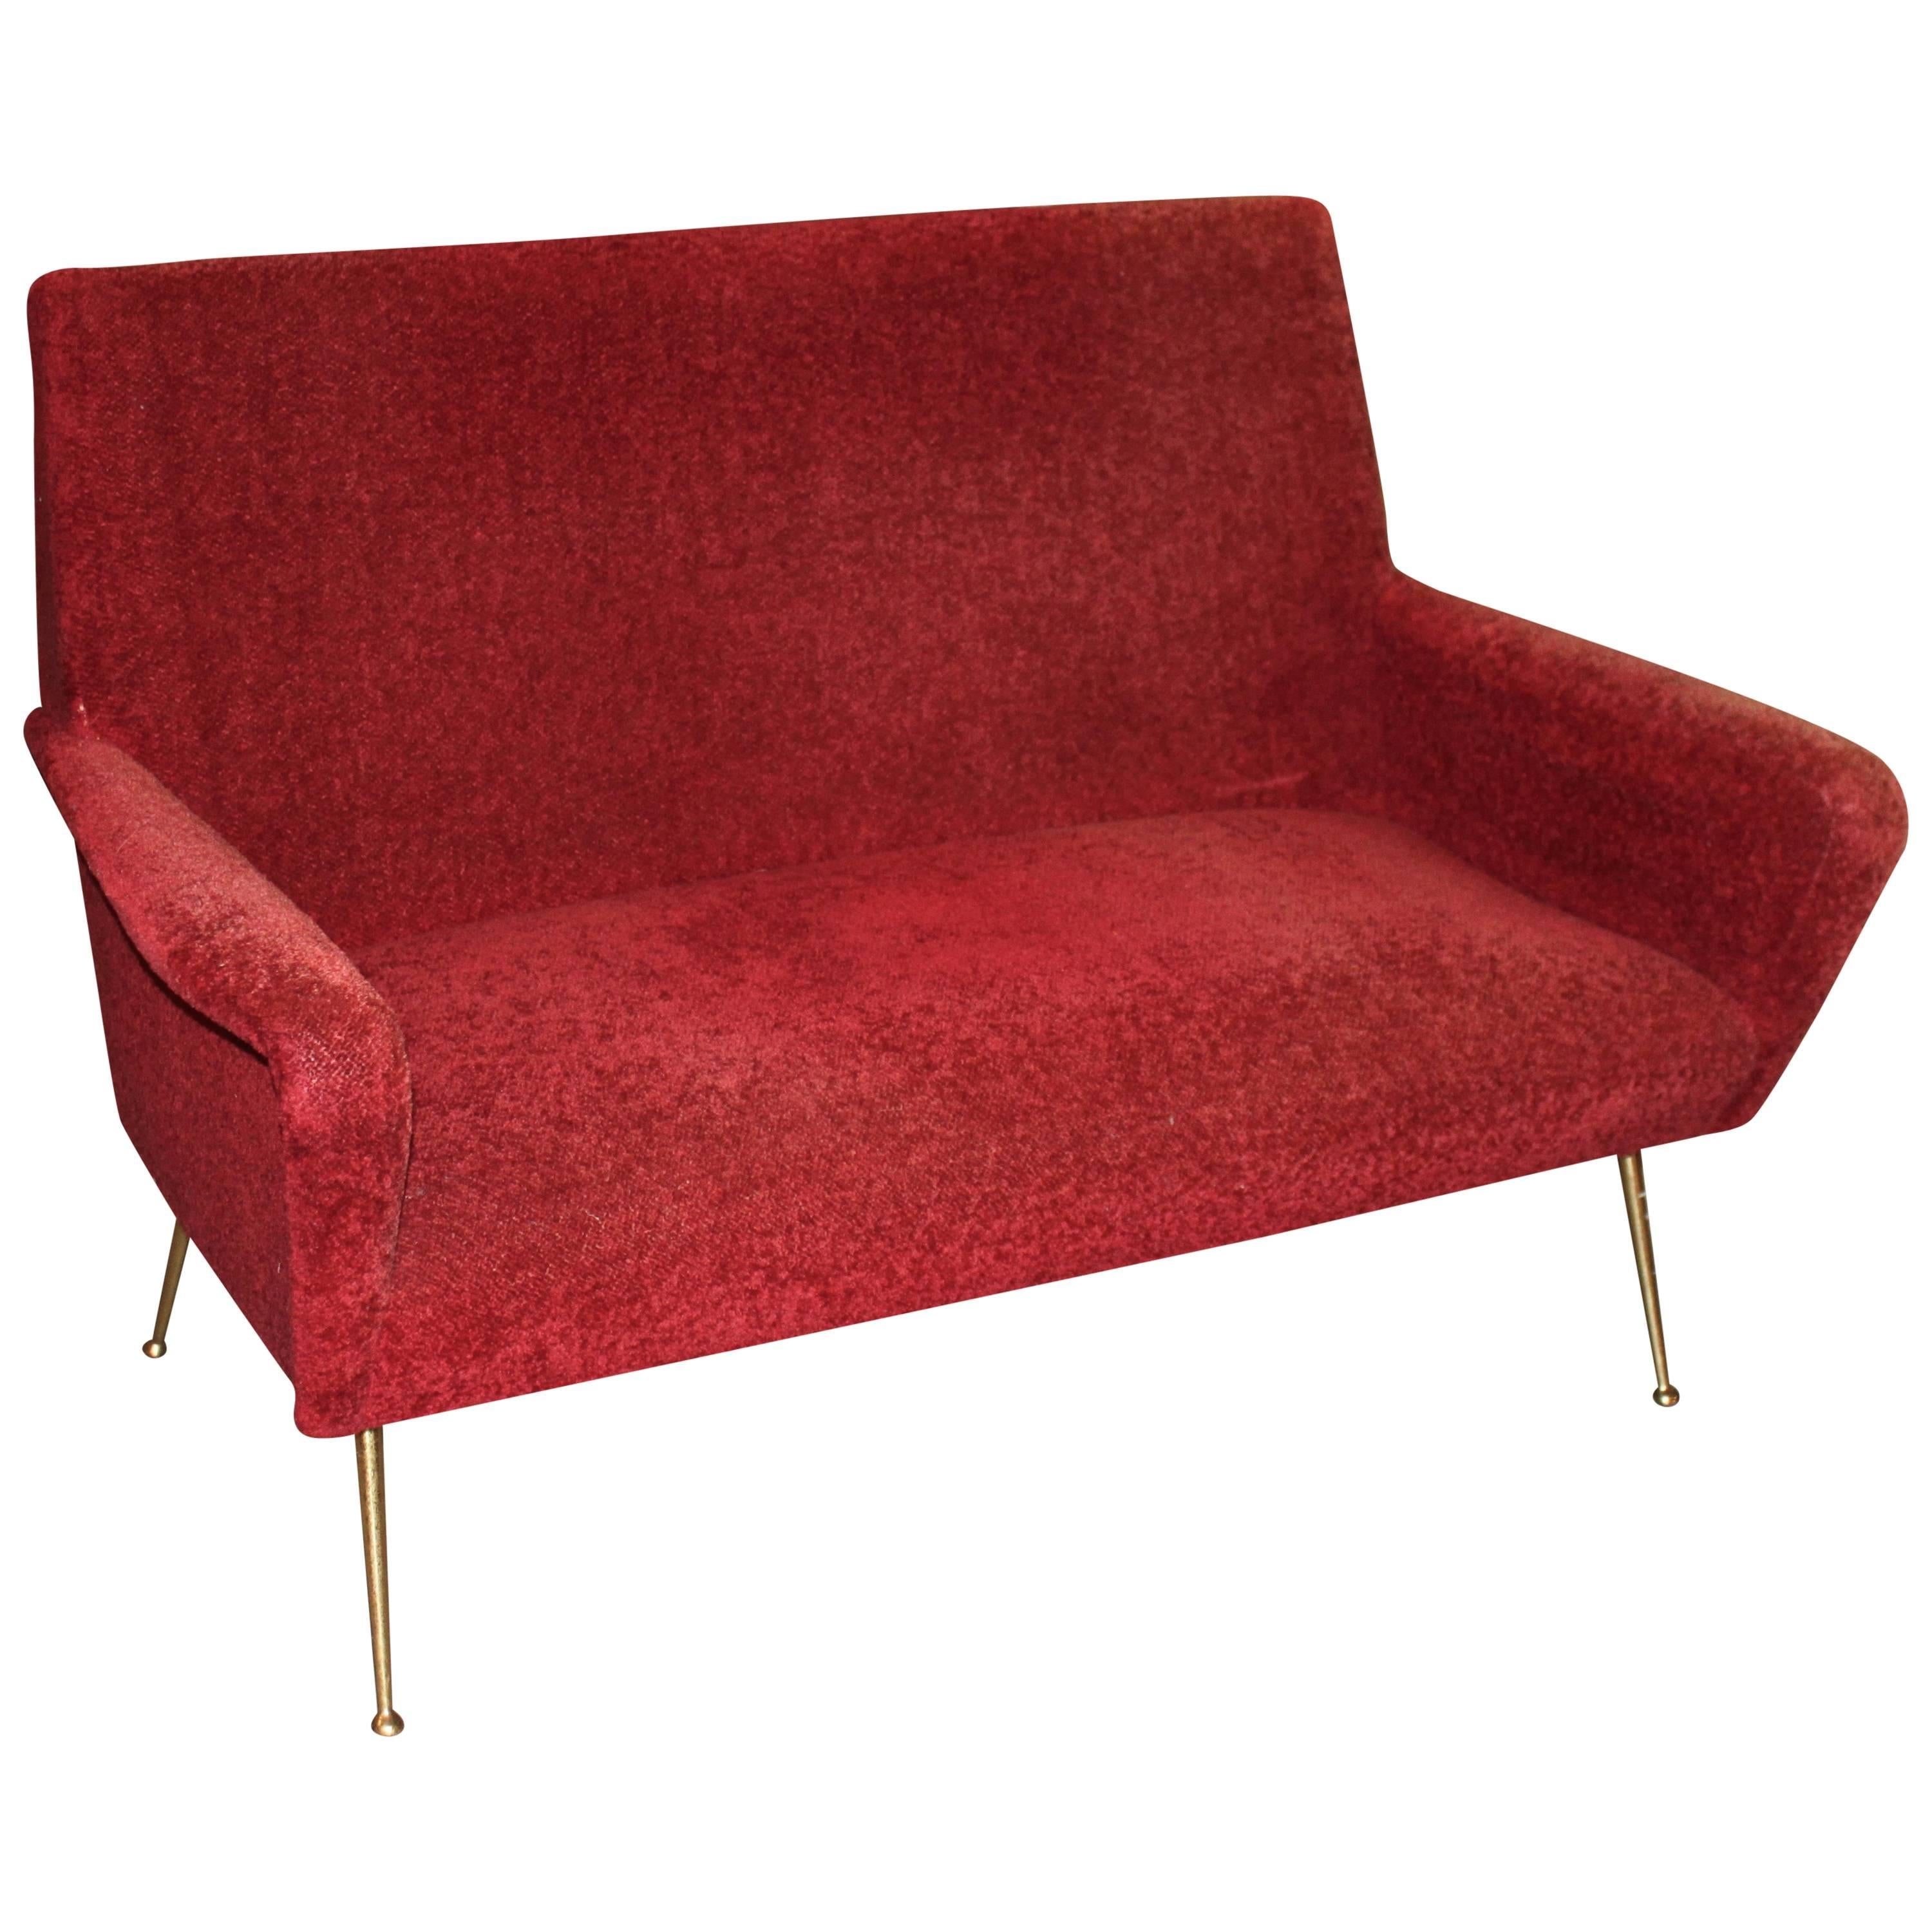 Beautiful Italian Mid-Century Modern settee sofa with brass legs. Ready for your choice of upholstery.
 